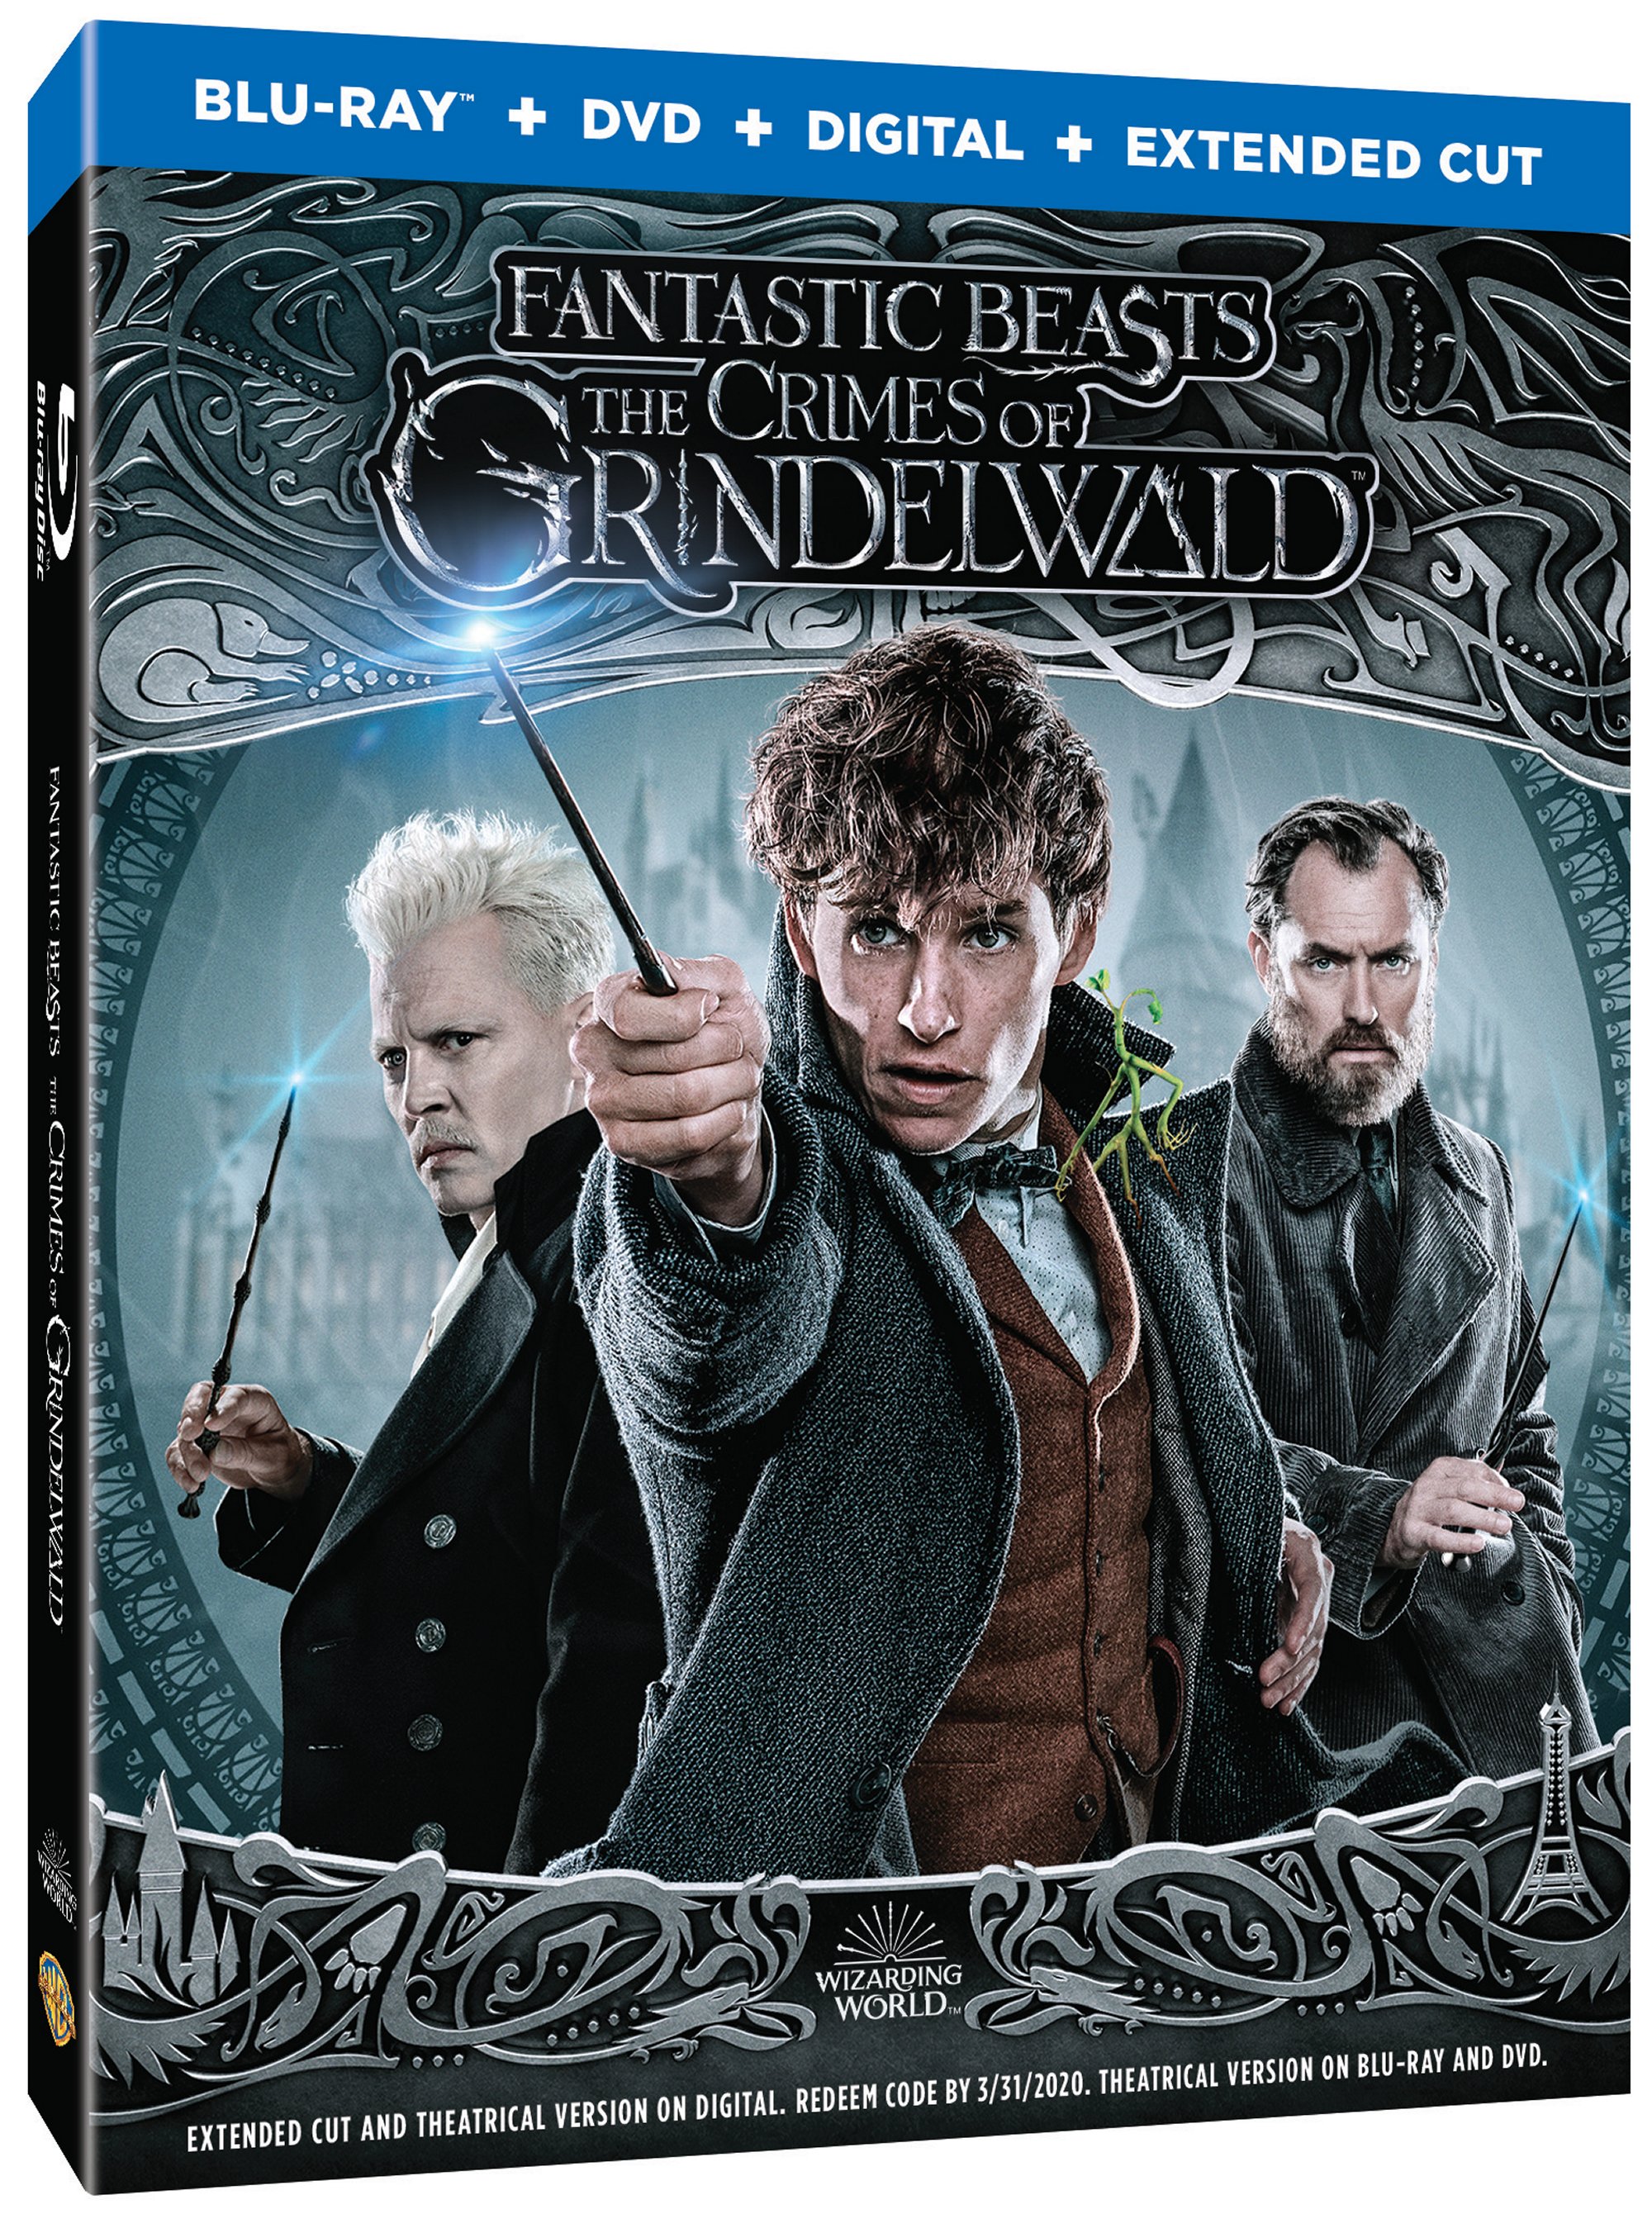 Fantastic Beasts: The Crimes Of Grindelwald Blu-Ray Combo Pack cover (Warner Bros. Home Entertainment)